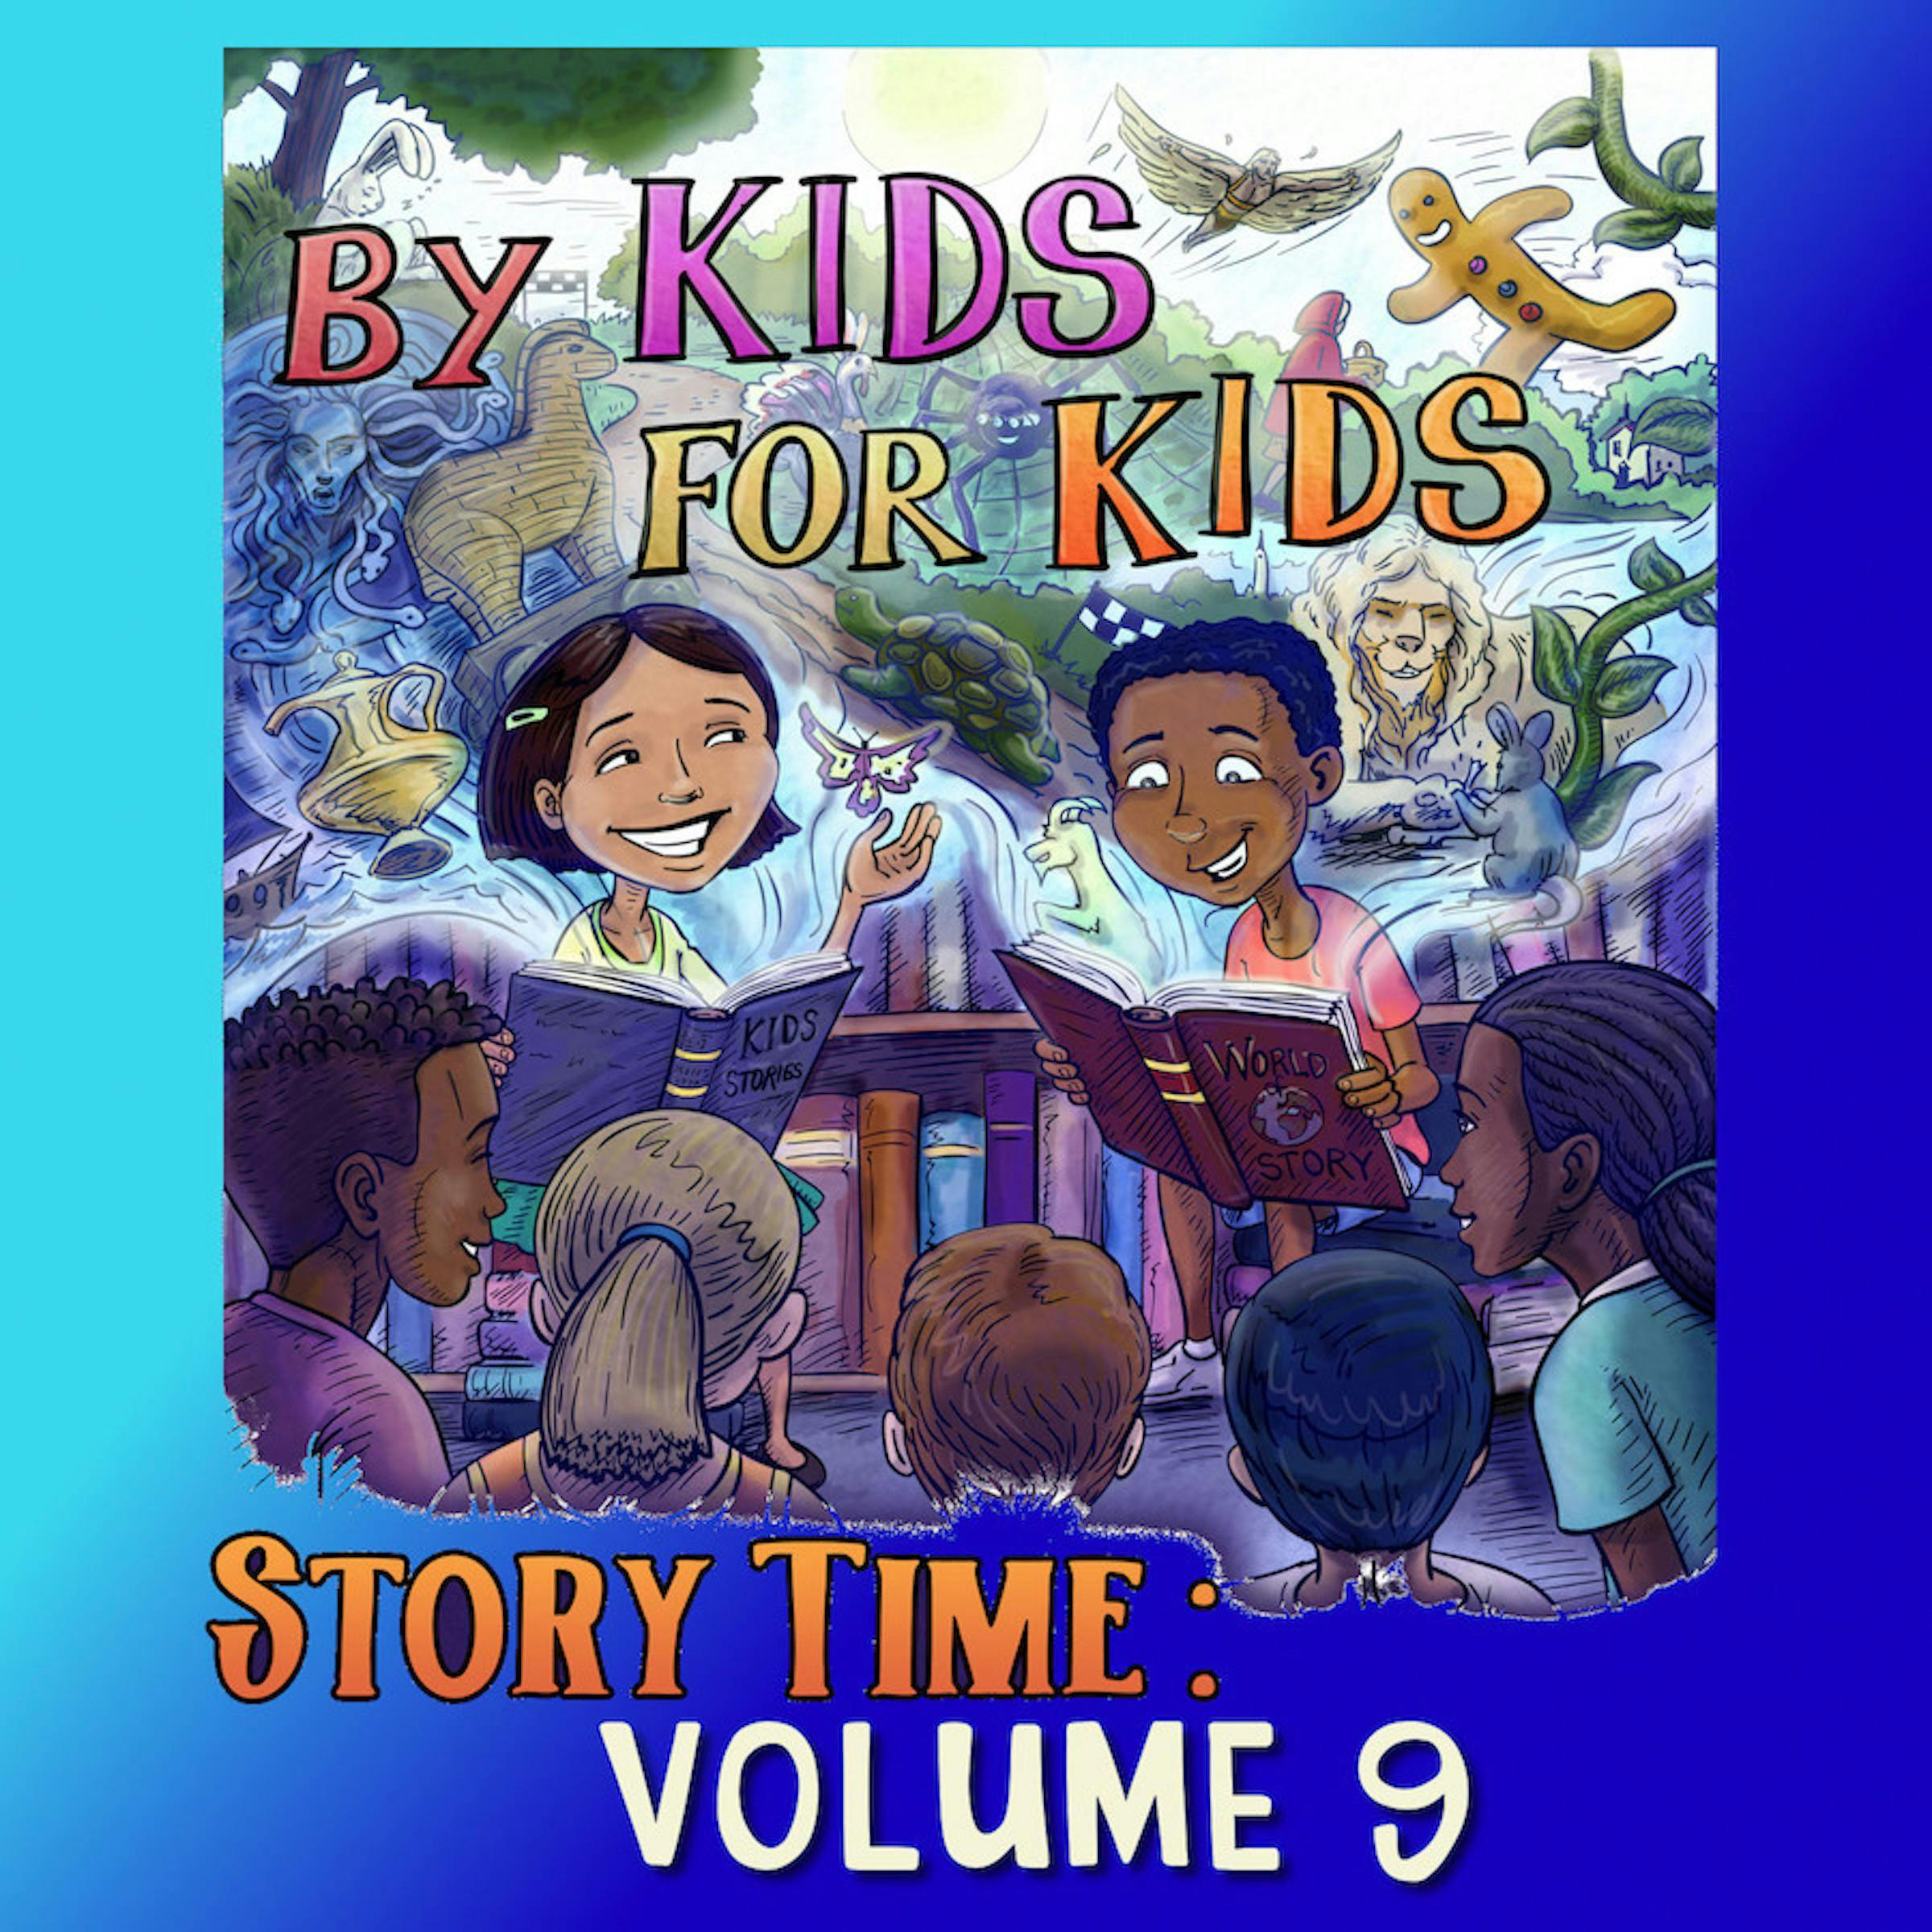 By Kids For Kids Story Time: Volume 09 - By Kids For Kids Story Time